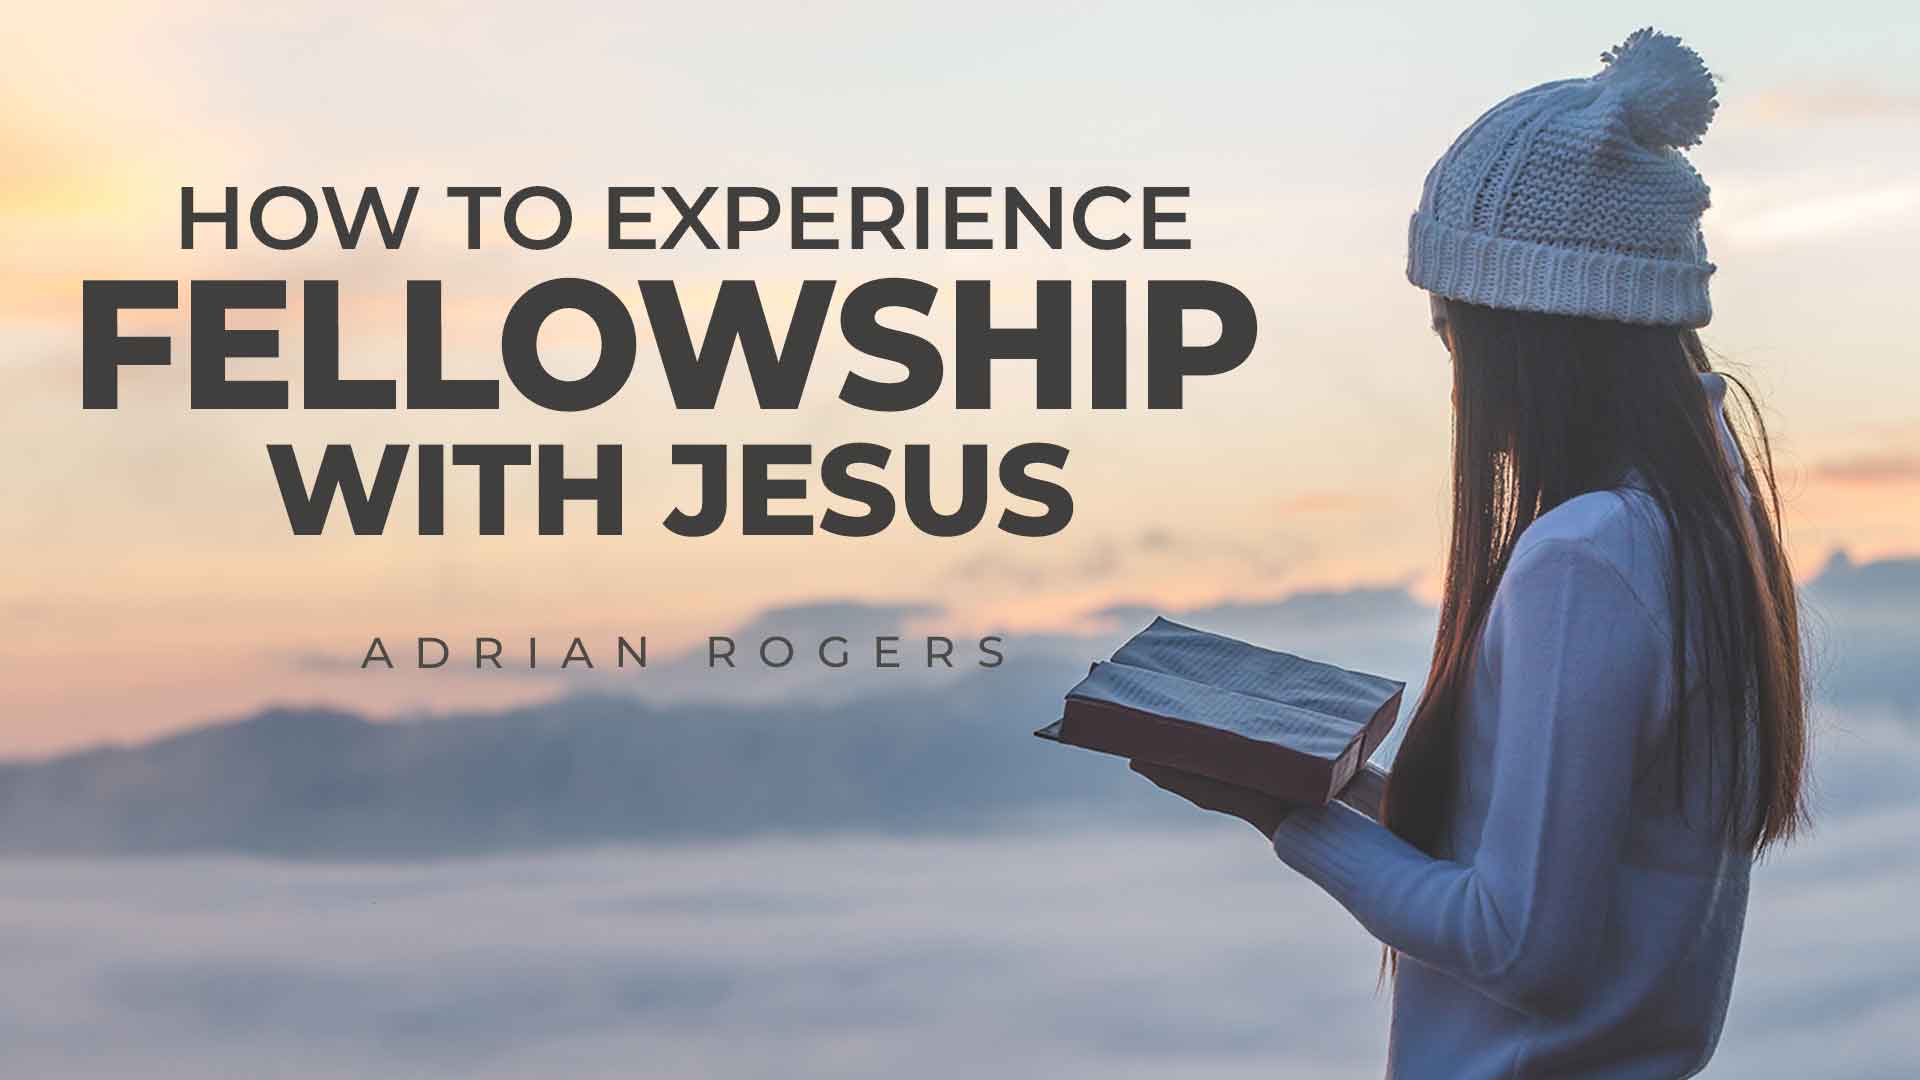 How to Experience Fellowship with Jesus 1920x1080